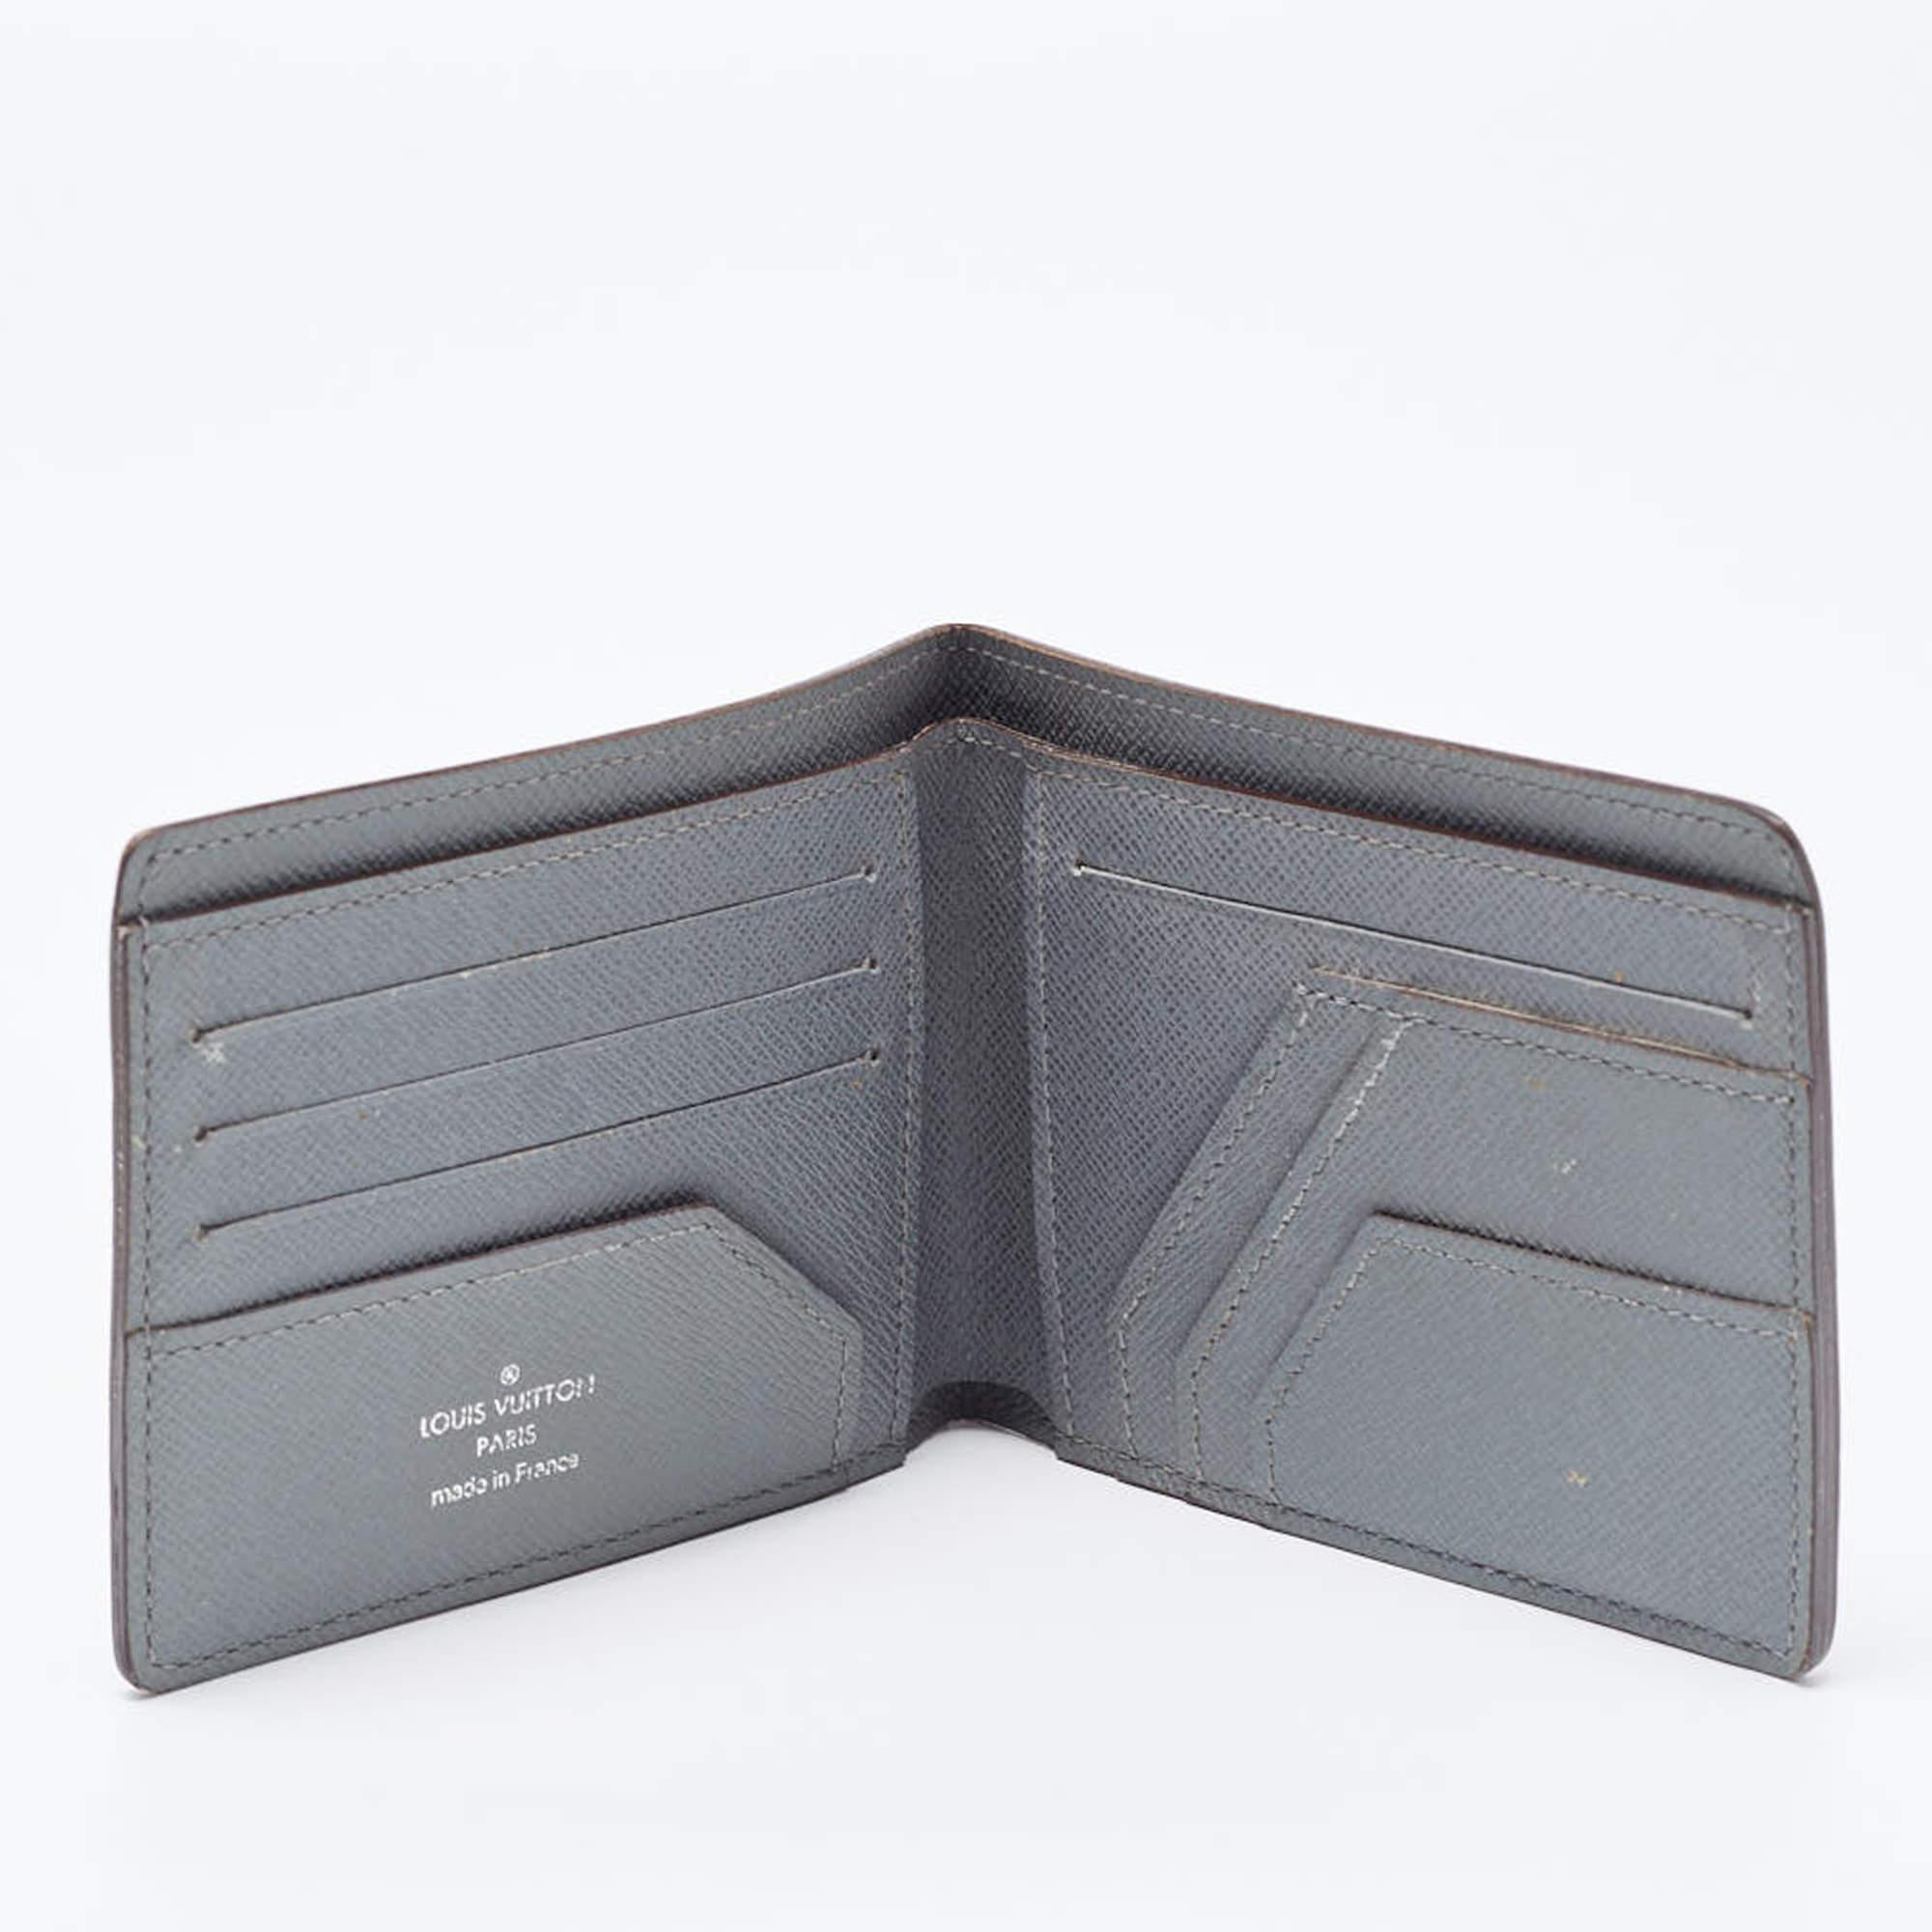 This designer wallet is an immaculate balance of sophistication and rational utility. It has been designed using prime quality materials and elevated by a sleek finish. The creation is equipped with ample space for your monetary